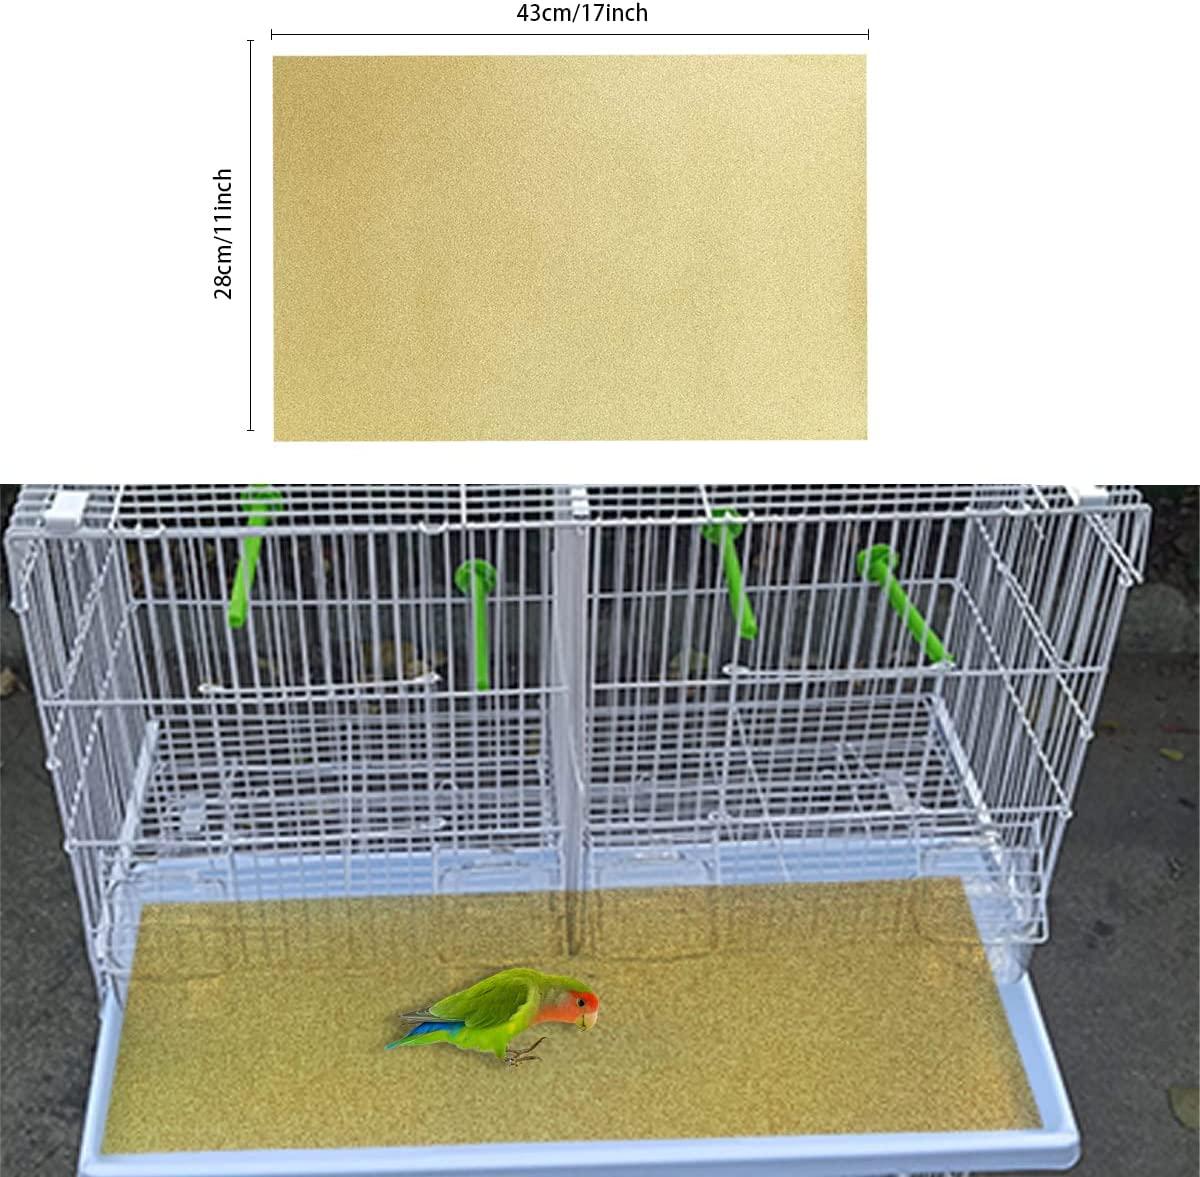 25PCS Gravel Paper for Bird Cage,11 x17 Bird cage Liner Gravel Paper  Special for Bird Cage in sea Sand-Great for Hard-Billed Birds Safe& Clean 